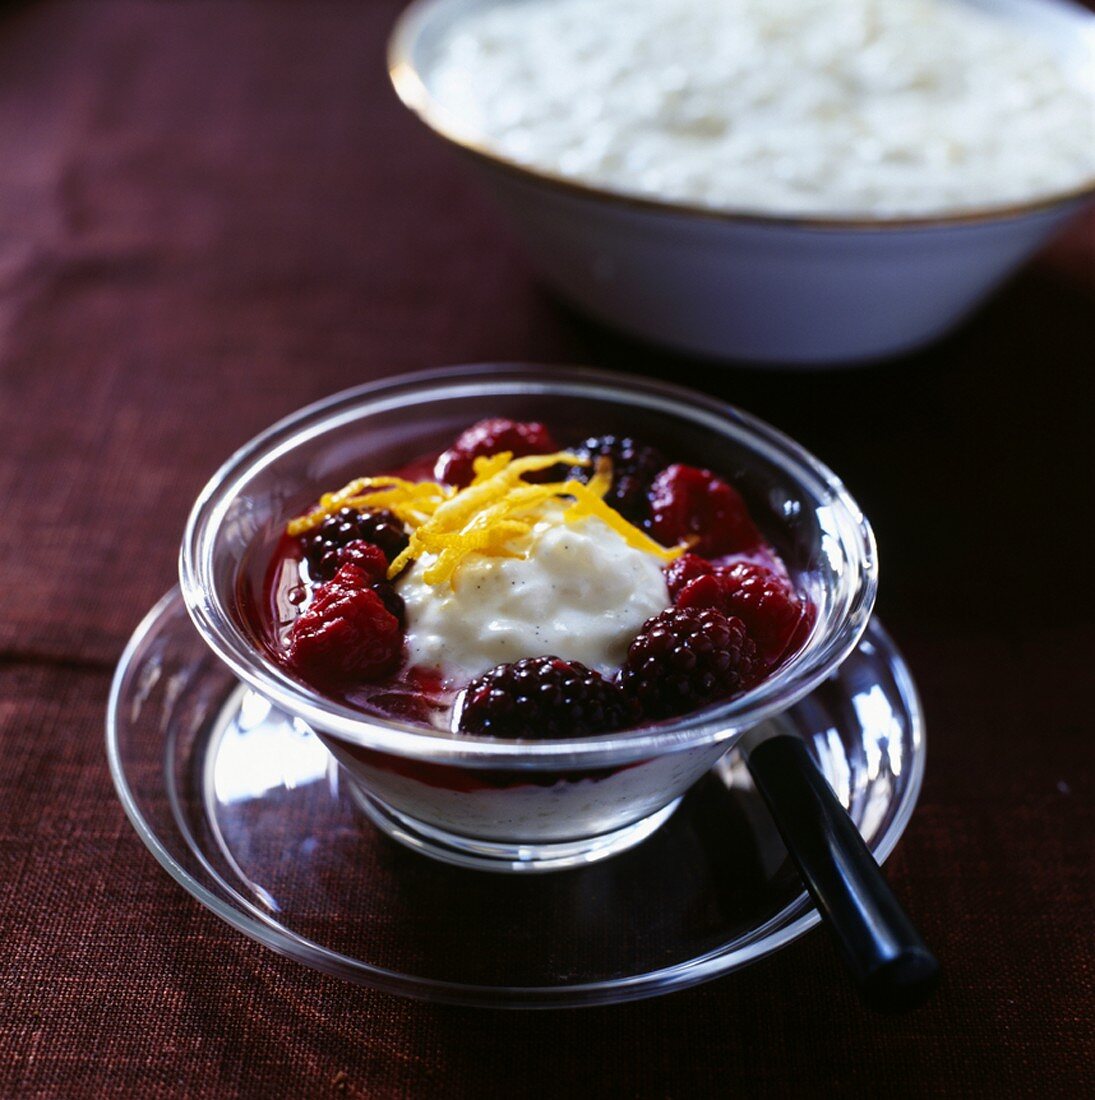 Rice pudding with warm berry sauce (Christmas dessert, Sweden)